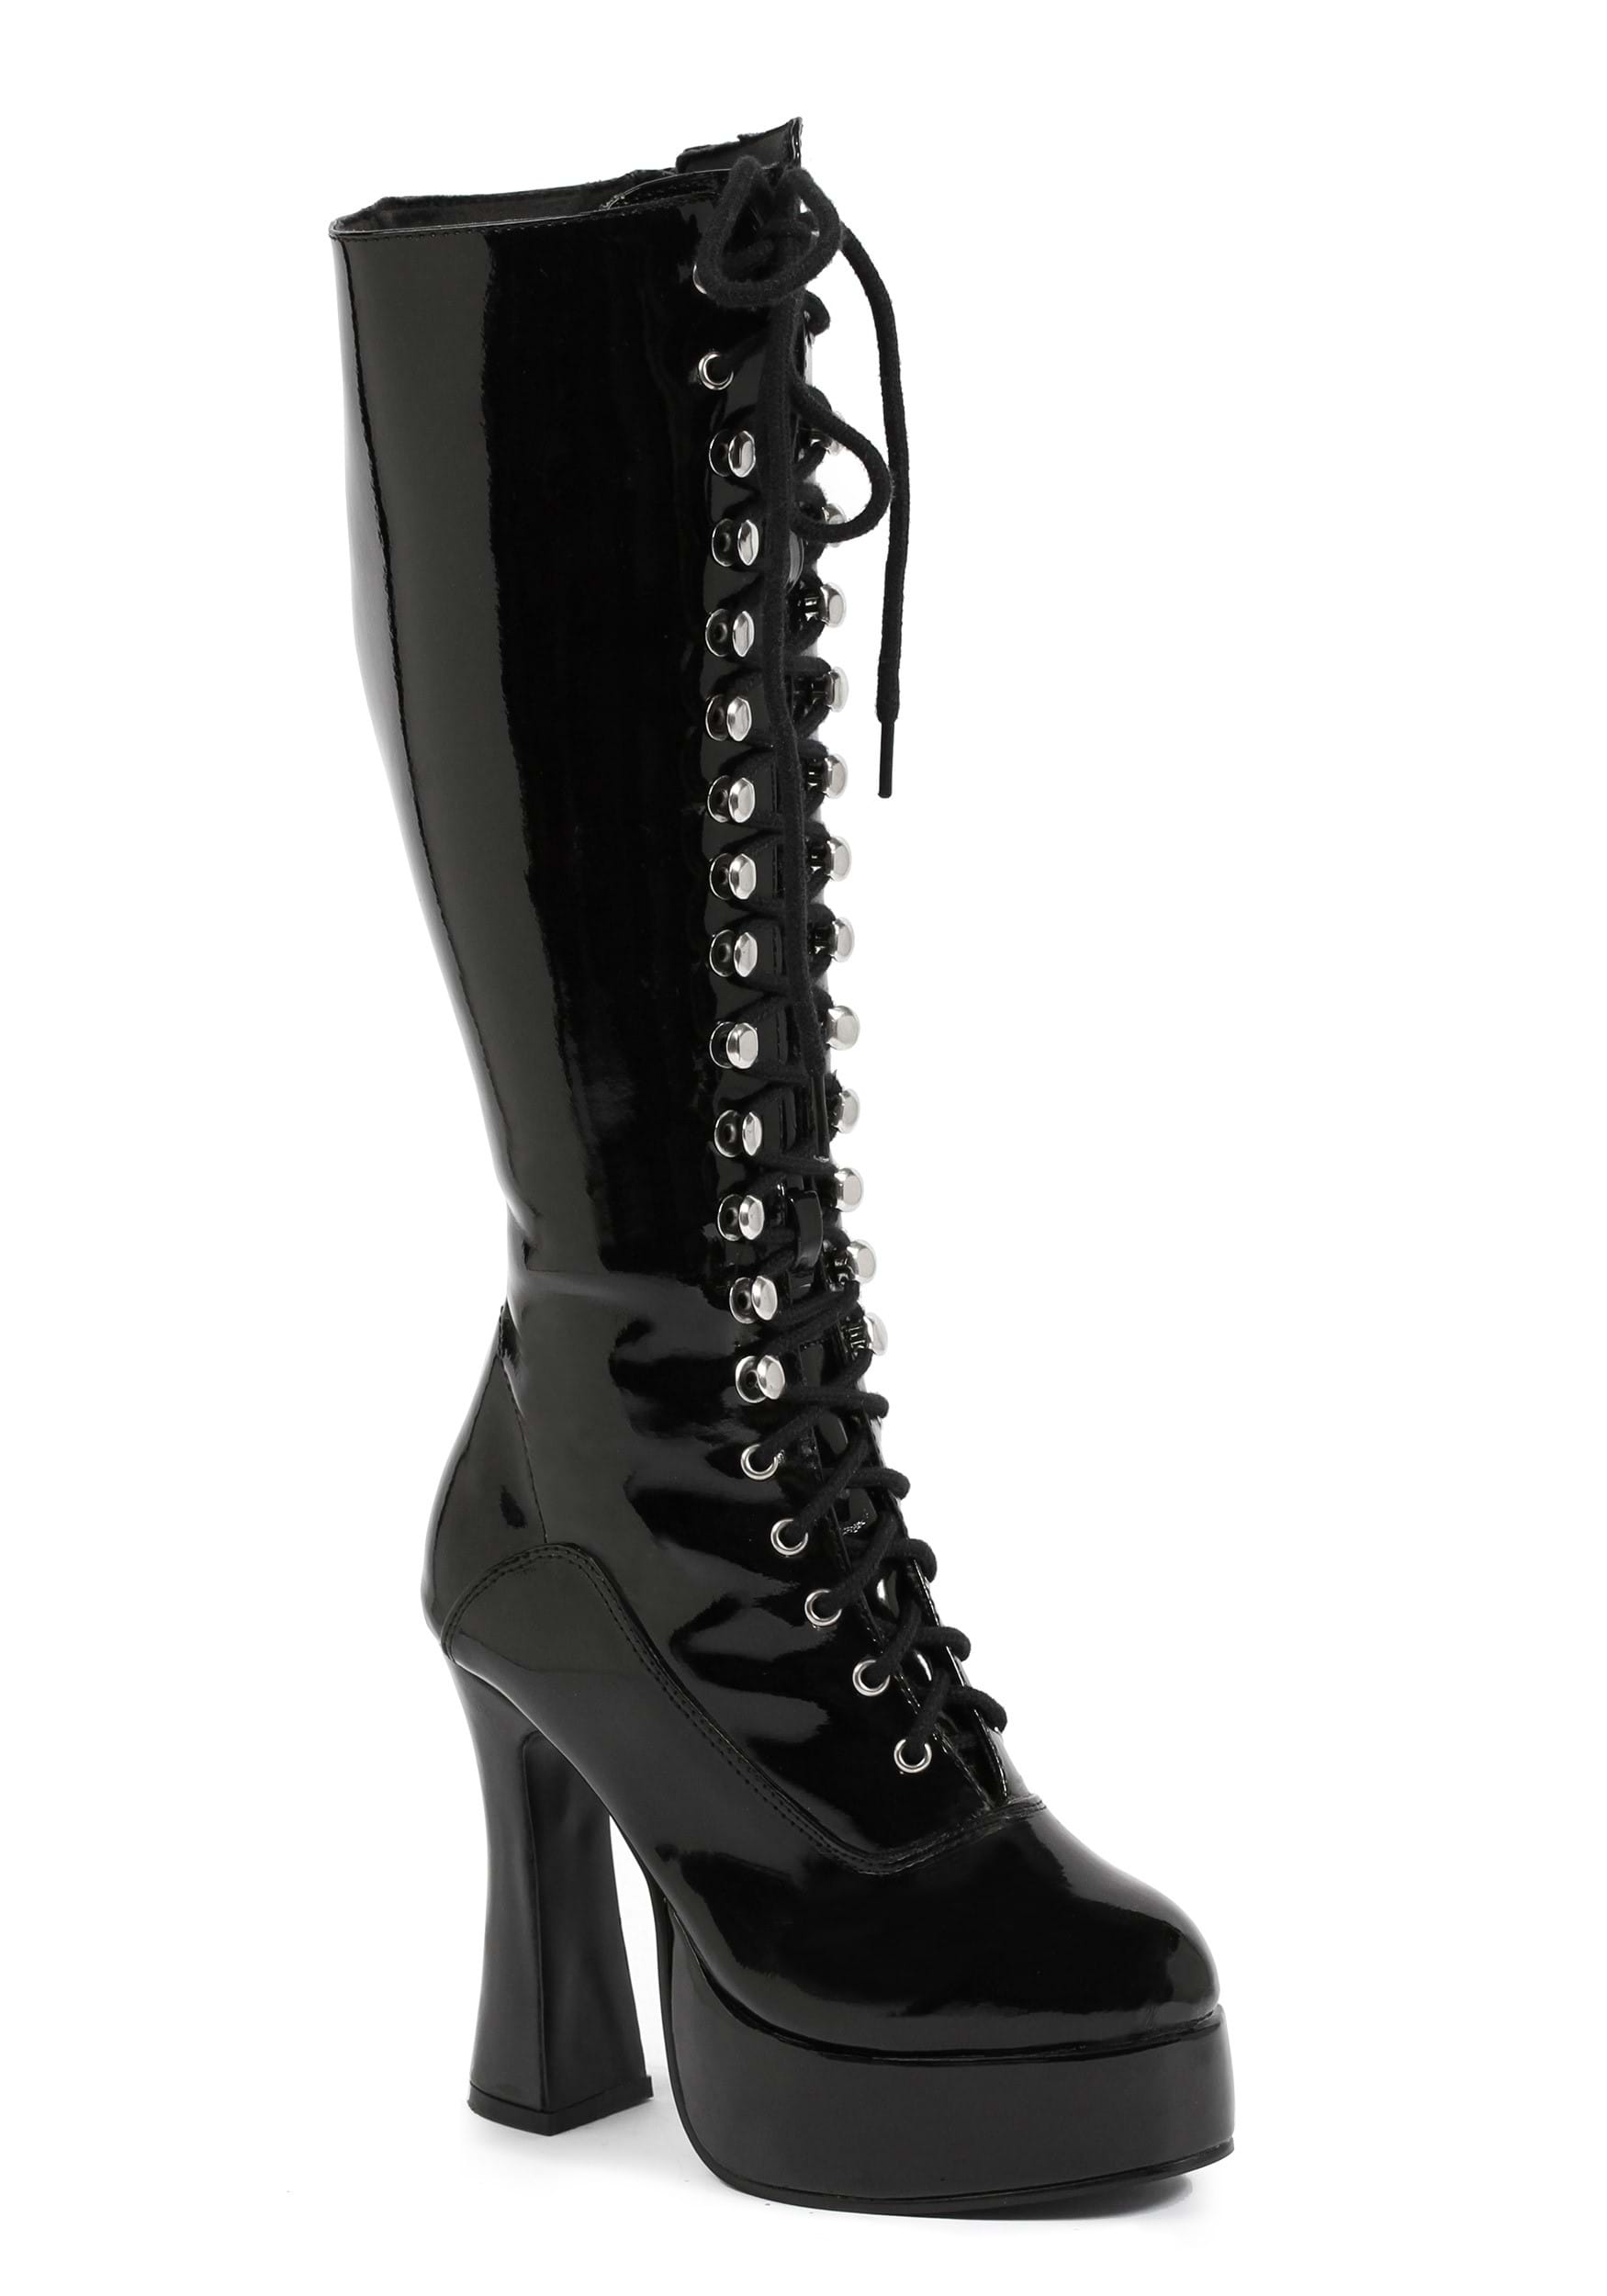 Women’s Black Lace Knee High Boots